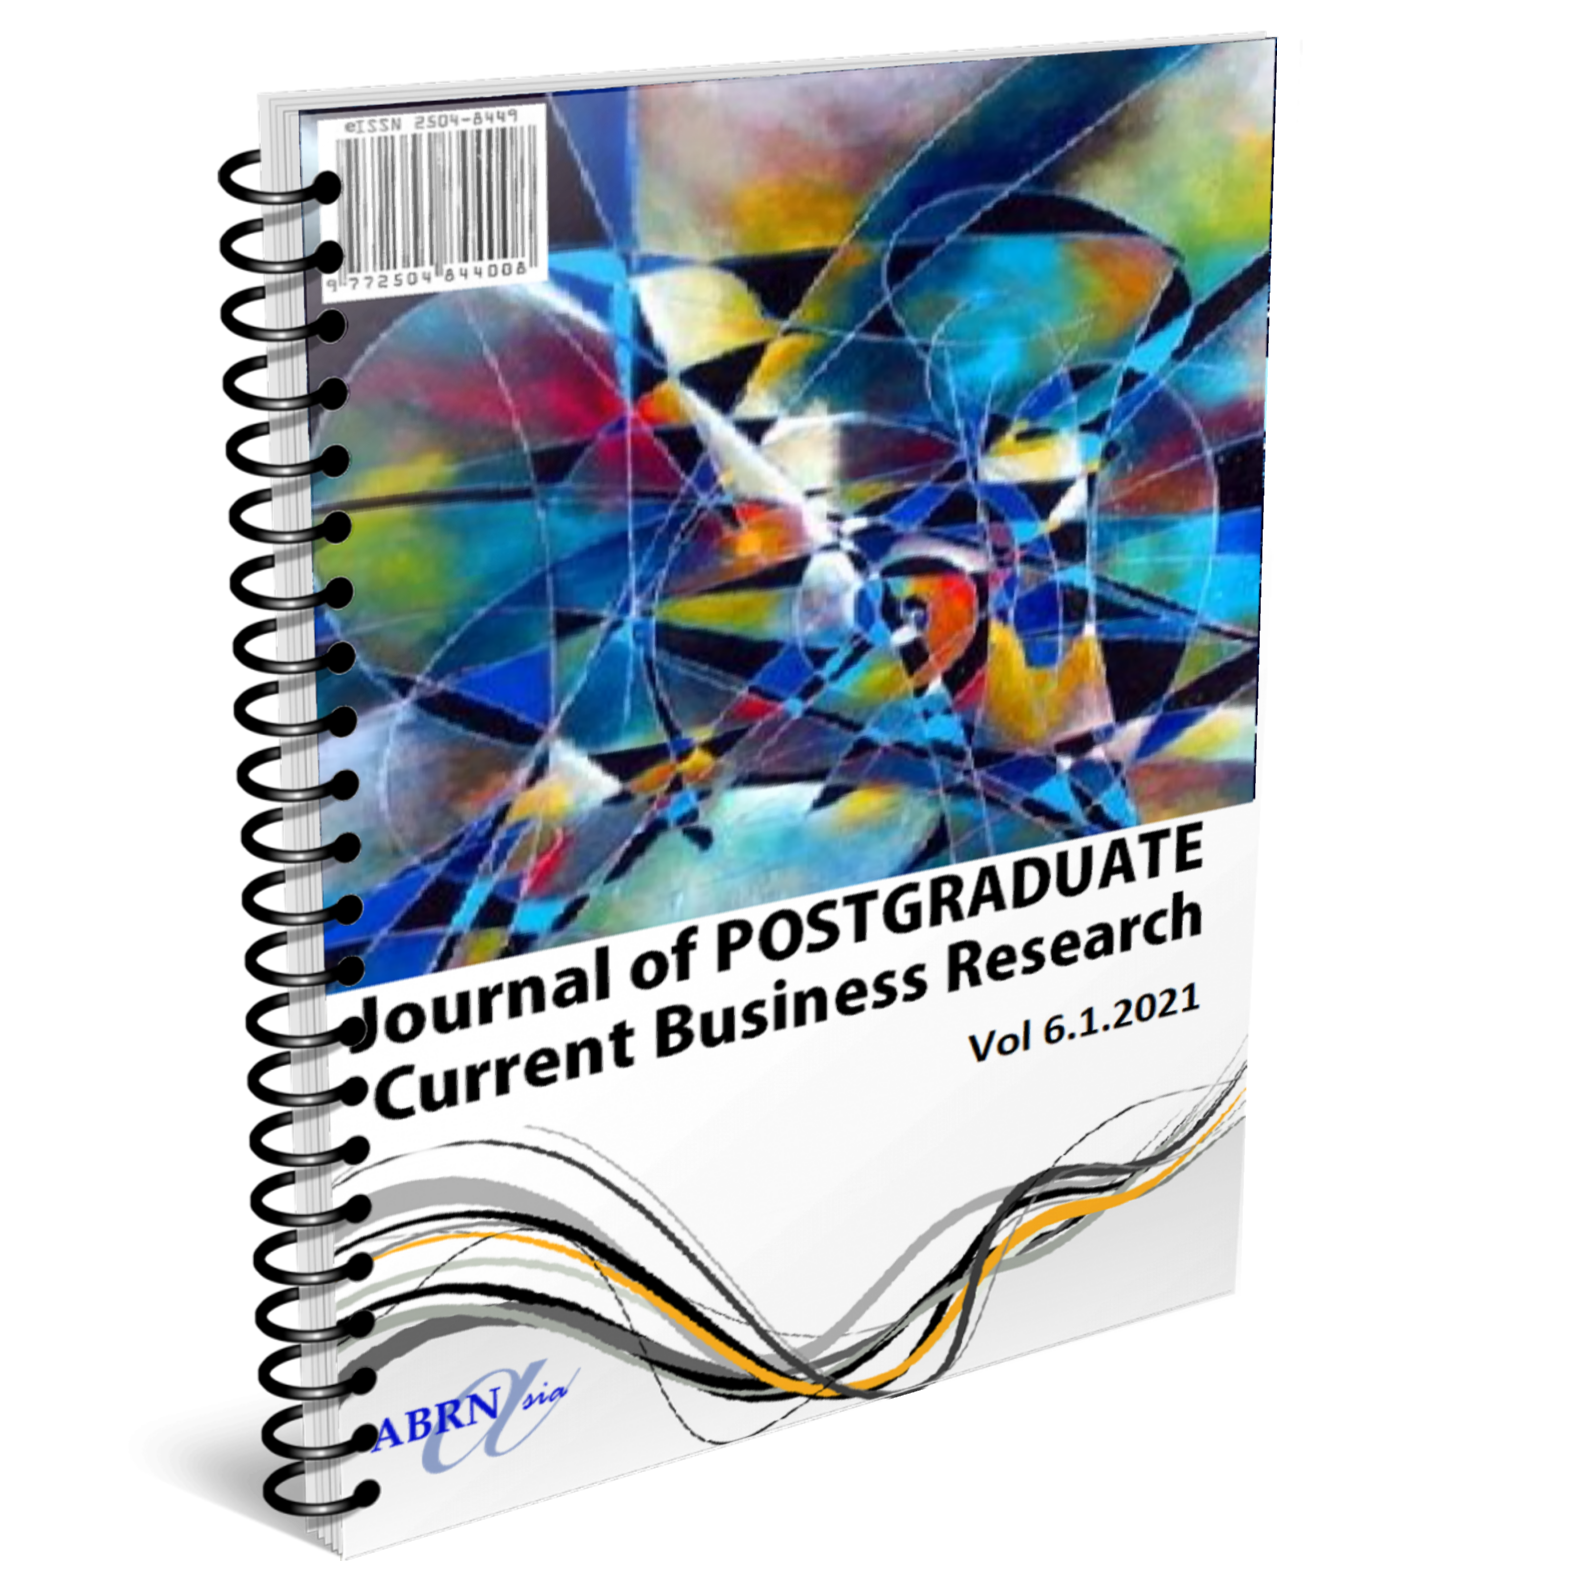 Journal of Postgraduate Current Business Research